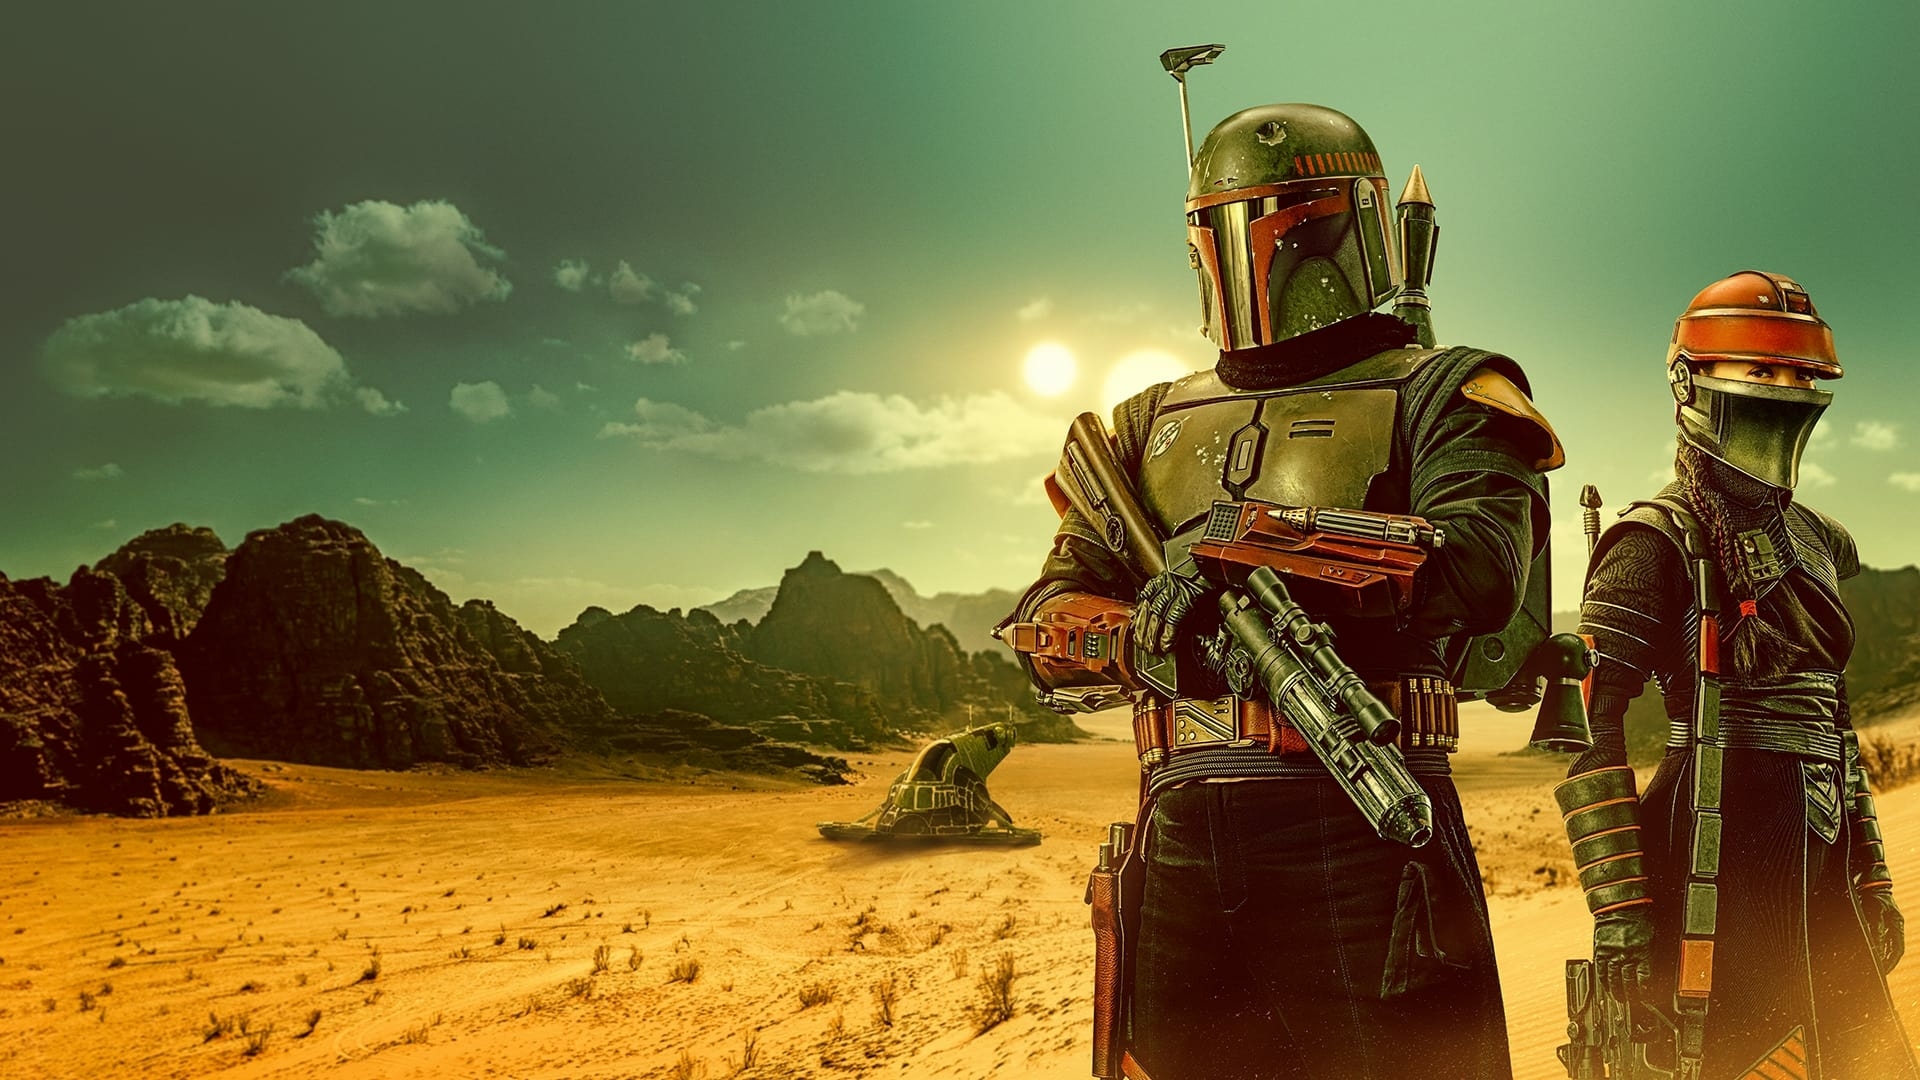 640x960 Resolution The Book Of Boba Fett Hd Official Poster Iphone 4